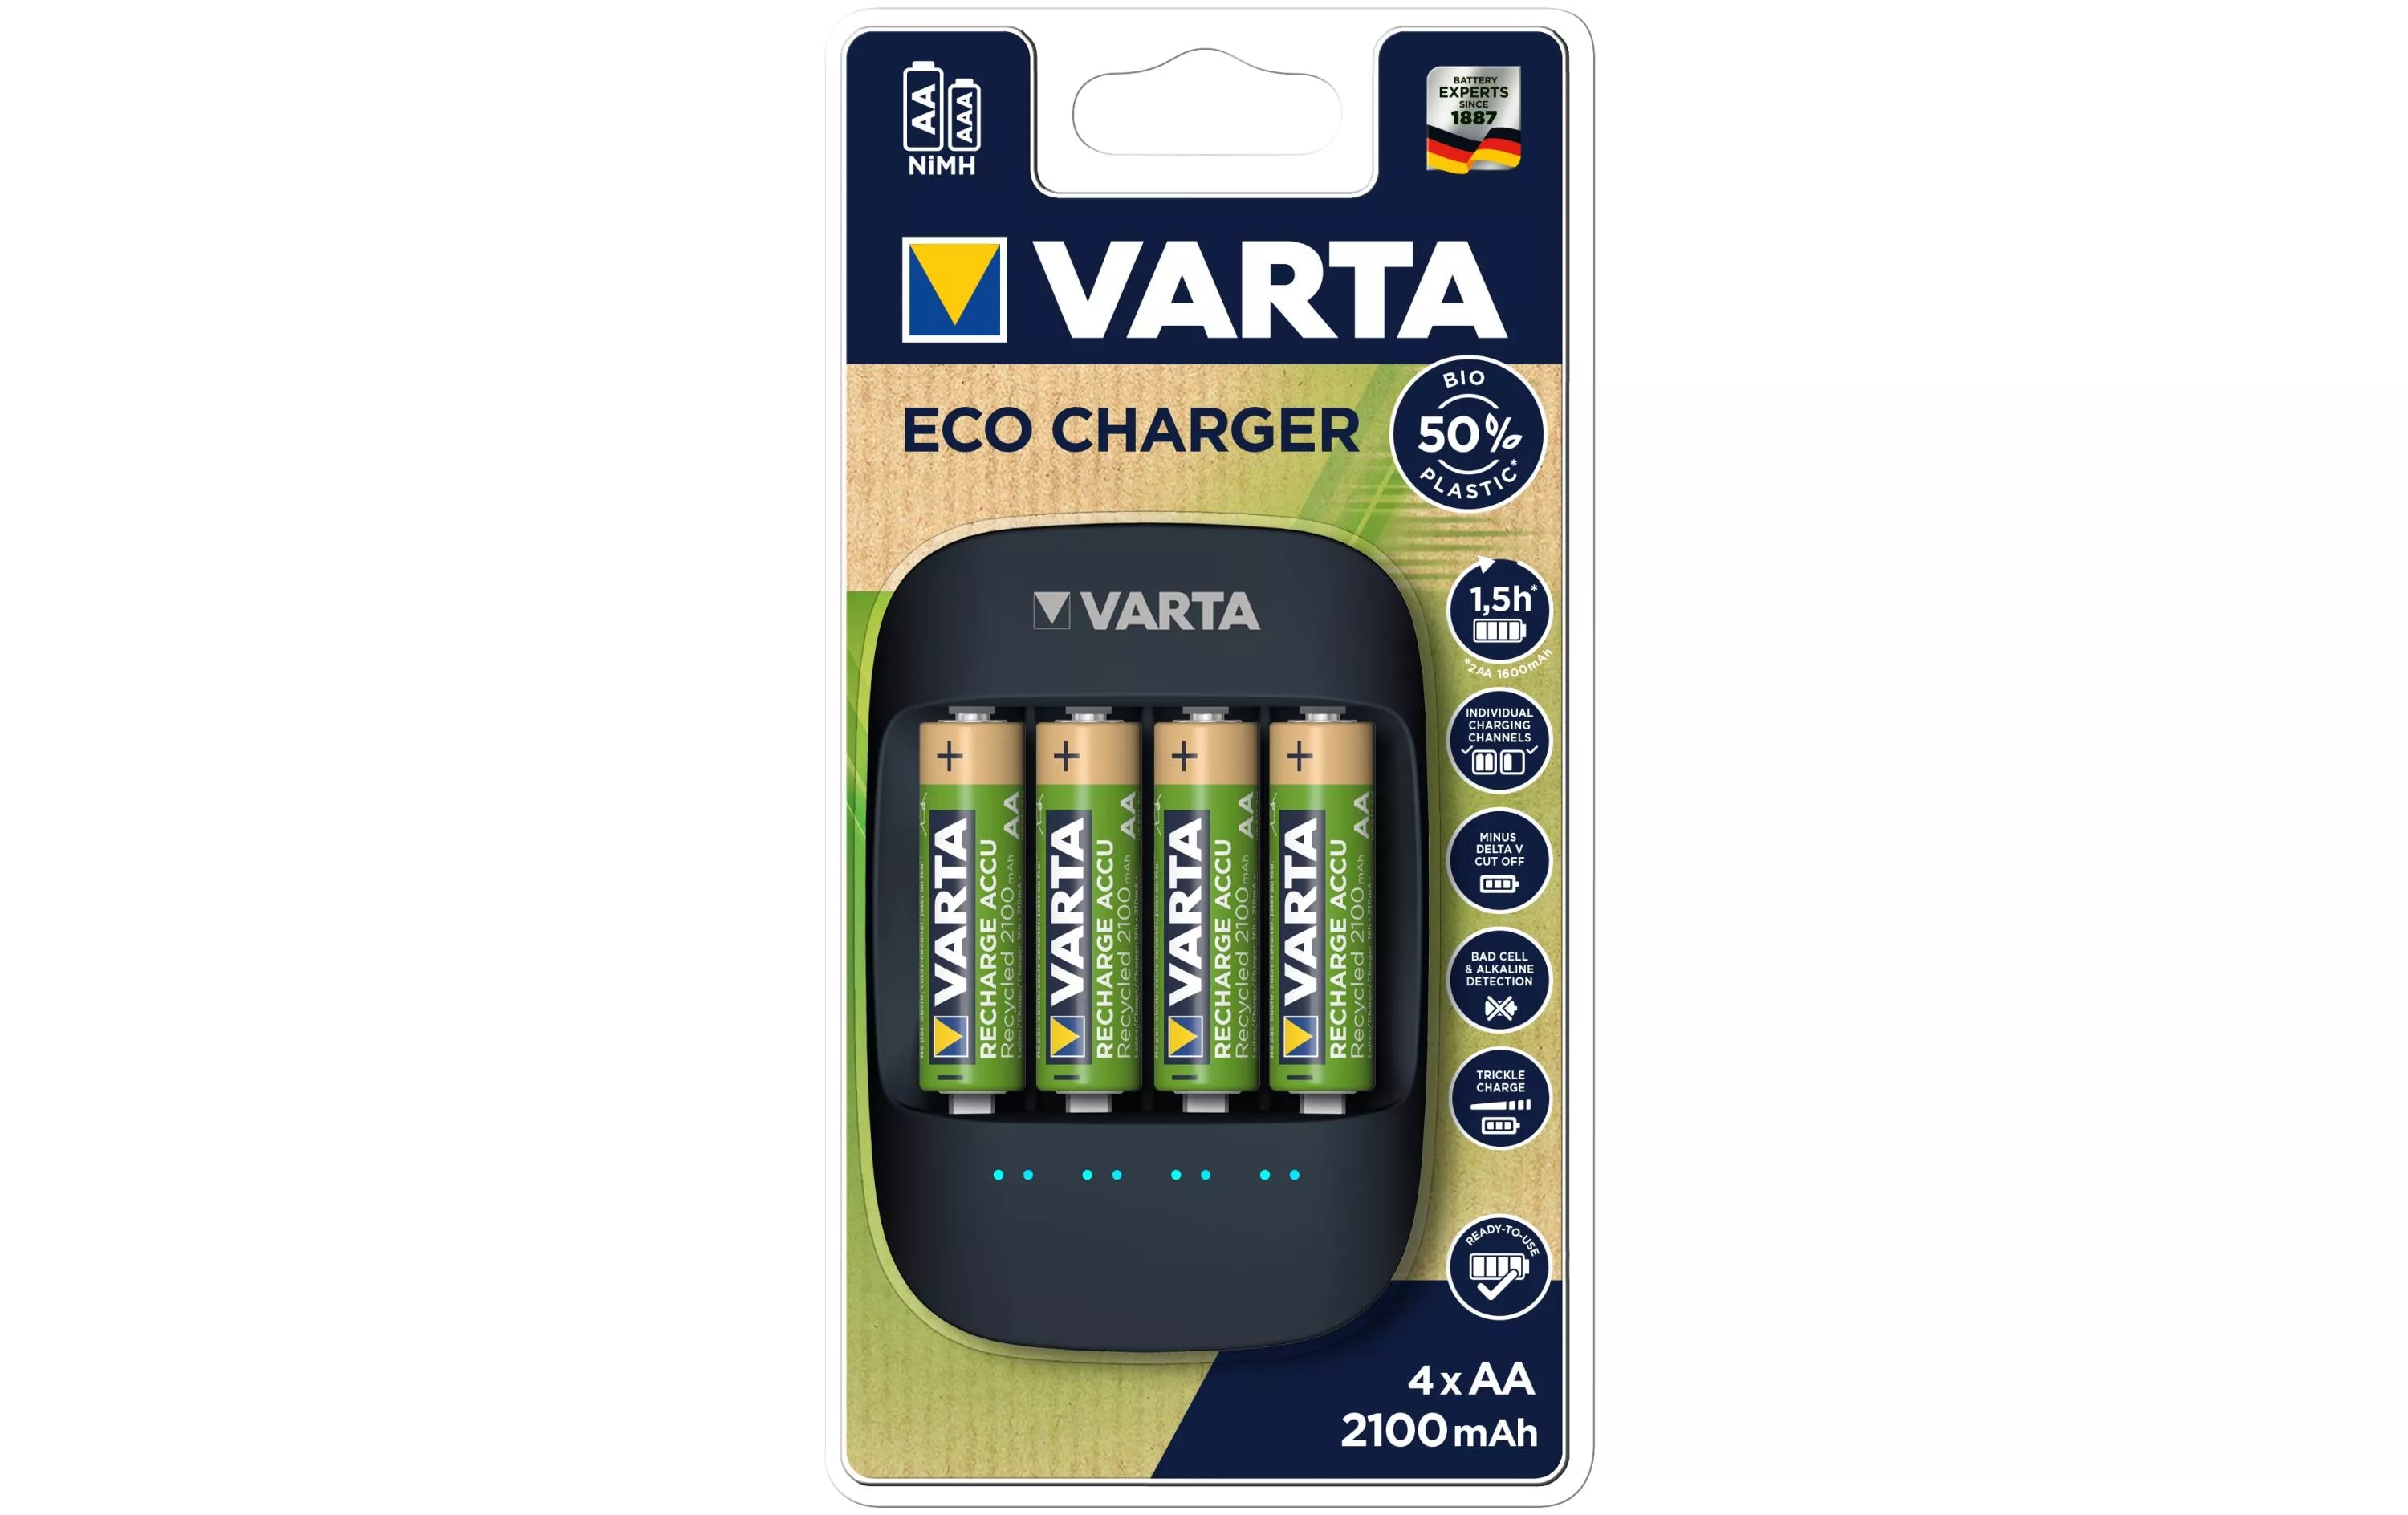 Chargeur Eco Charger incl. 4xAA